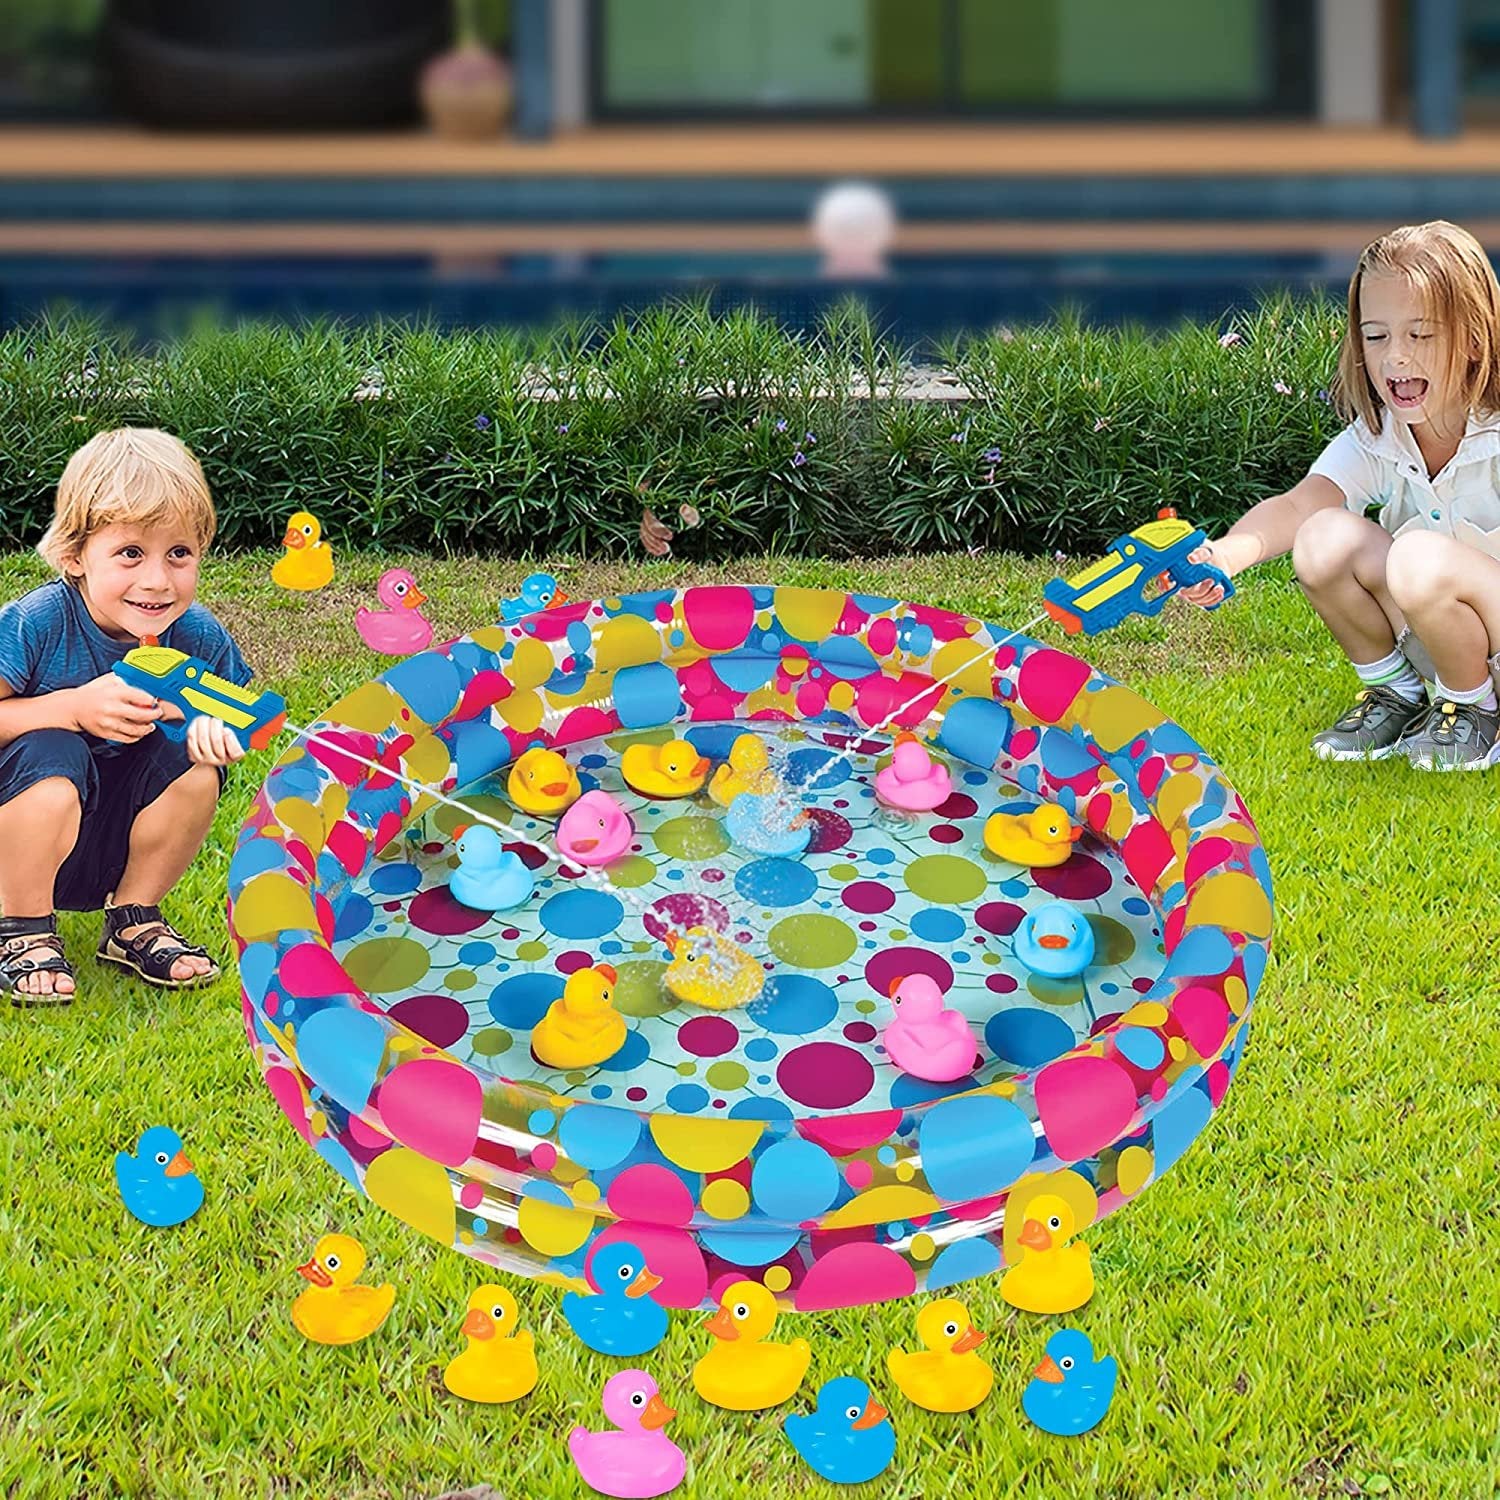 Gamie Duck’em Down Shooting Game, Carnival Duck Pond Game with 1 Inflatable Pool, 2 Water Guns, and 20 Ducks, Backyard Games for Kids, Outdoor Summer Toys, and Carnival Theme Party Decorations